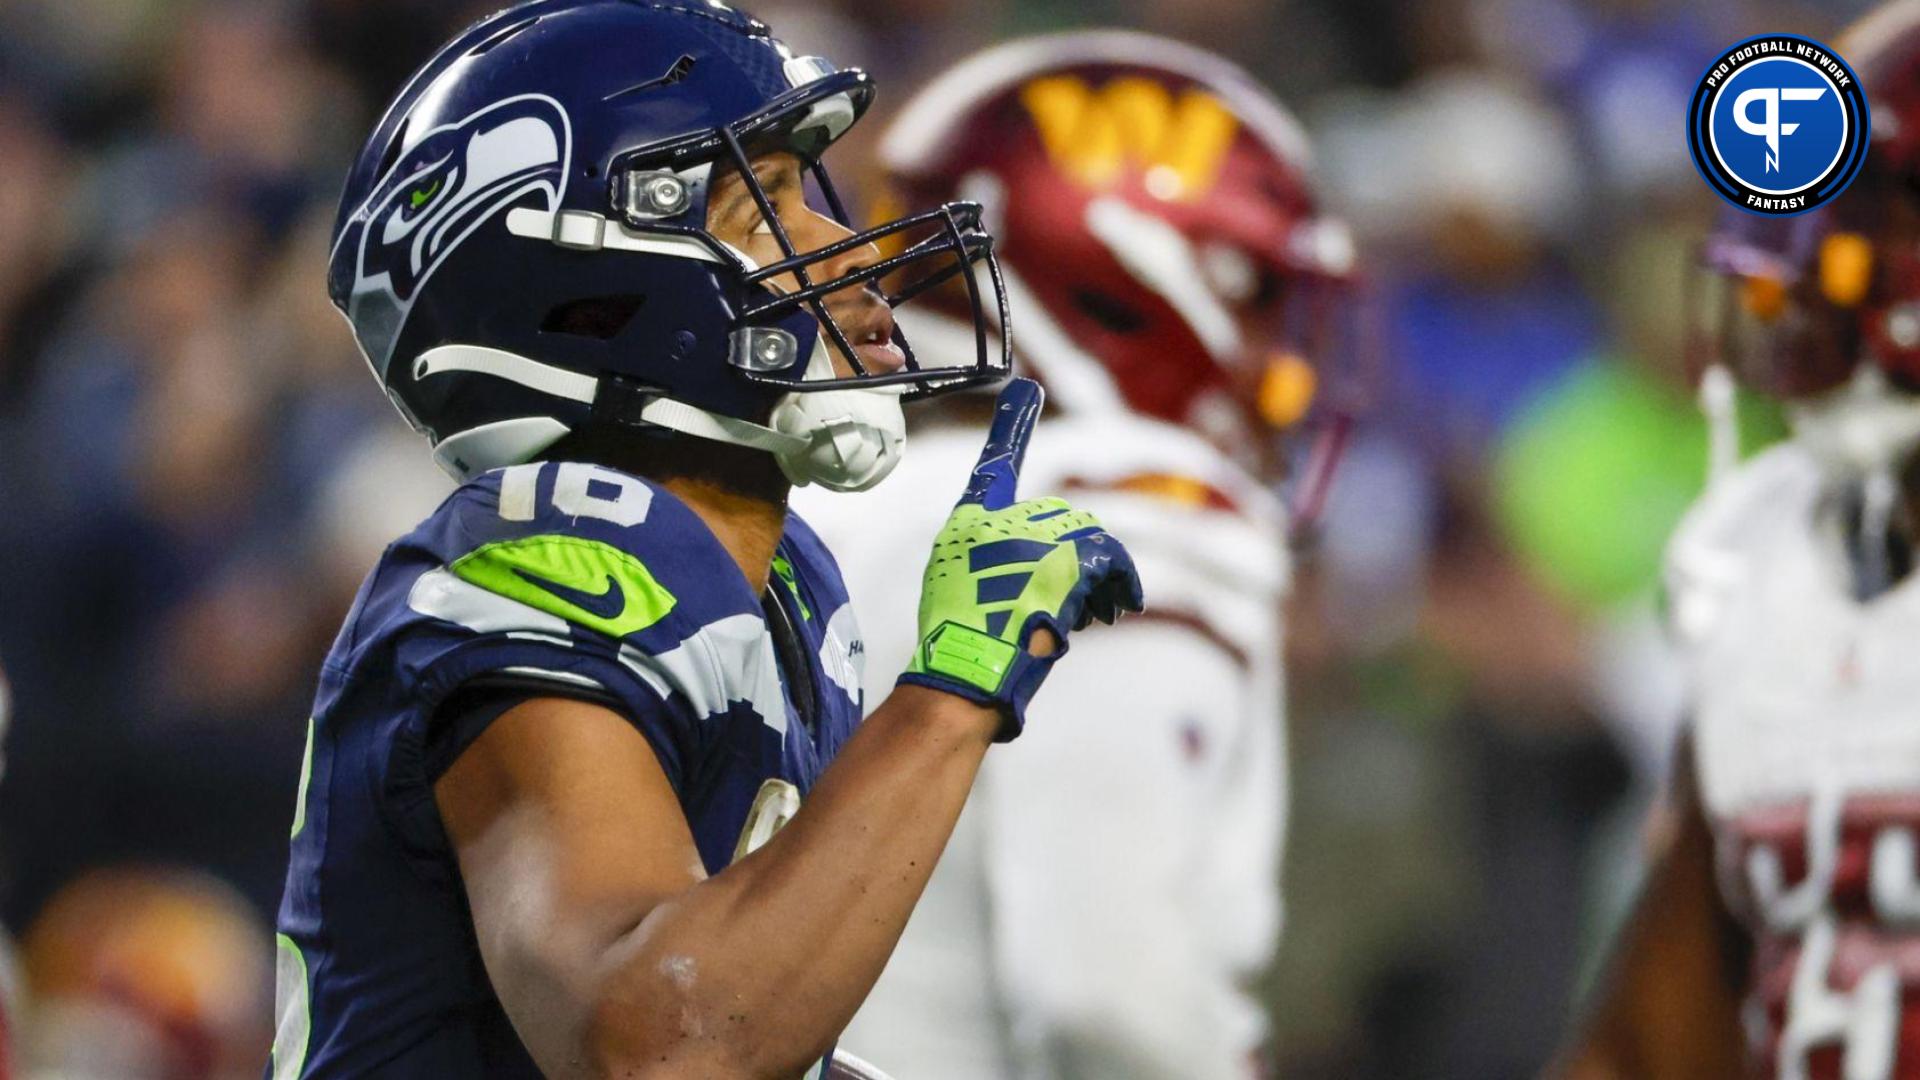 Tyler Lockett (16) reacts after catching a touchdown pass against the Washington Commanders during the fourth quarter at Lumen Field.